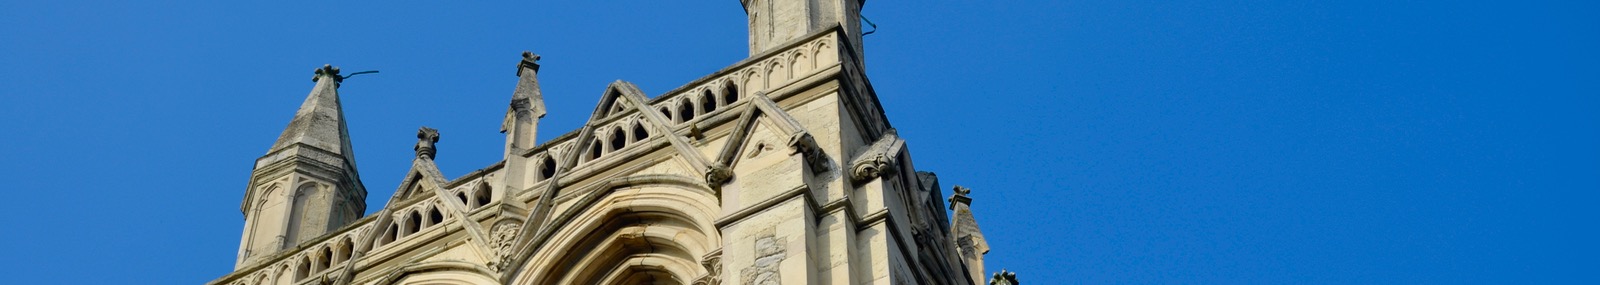 Old Christ Church Tower